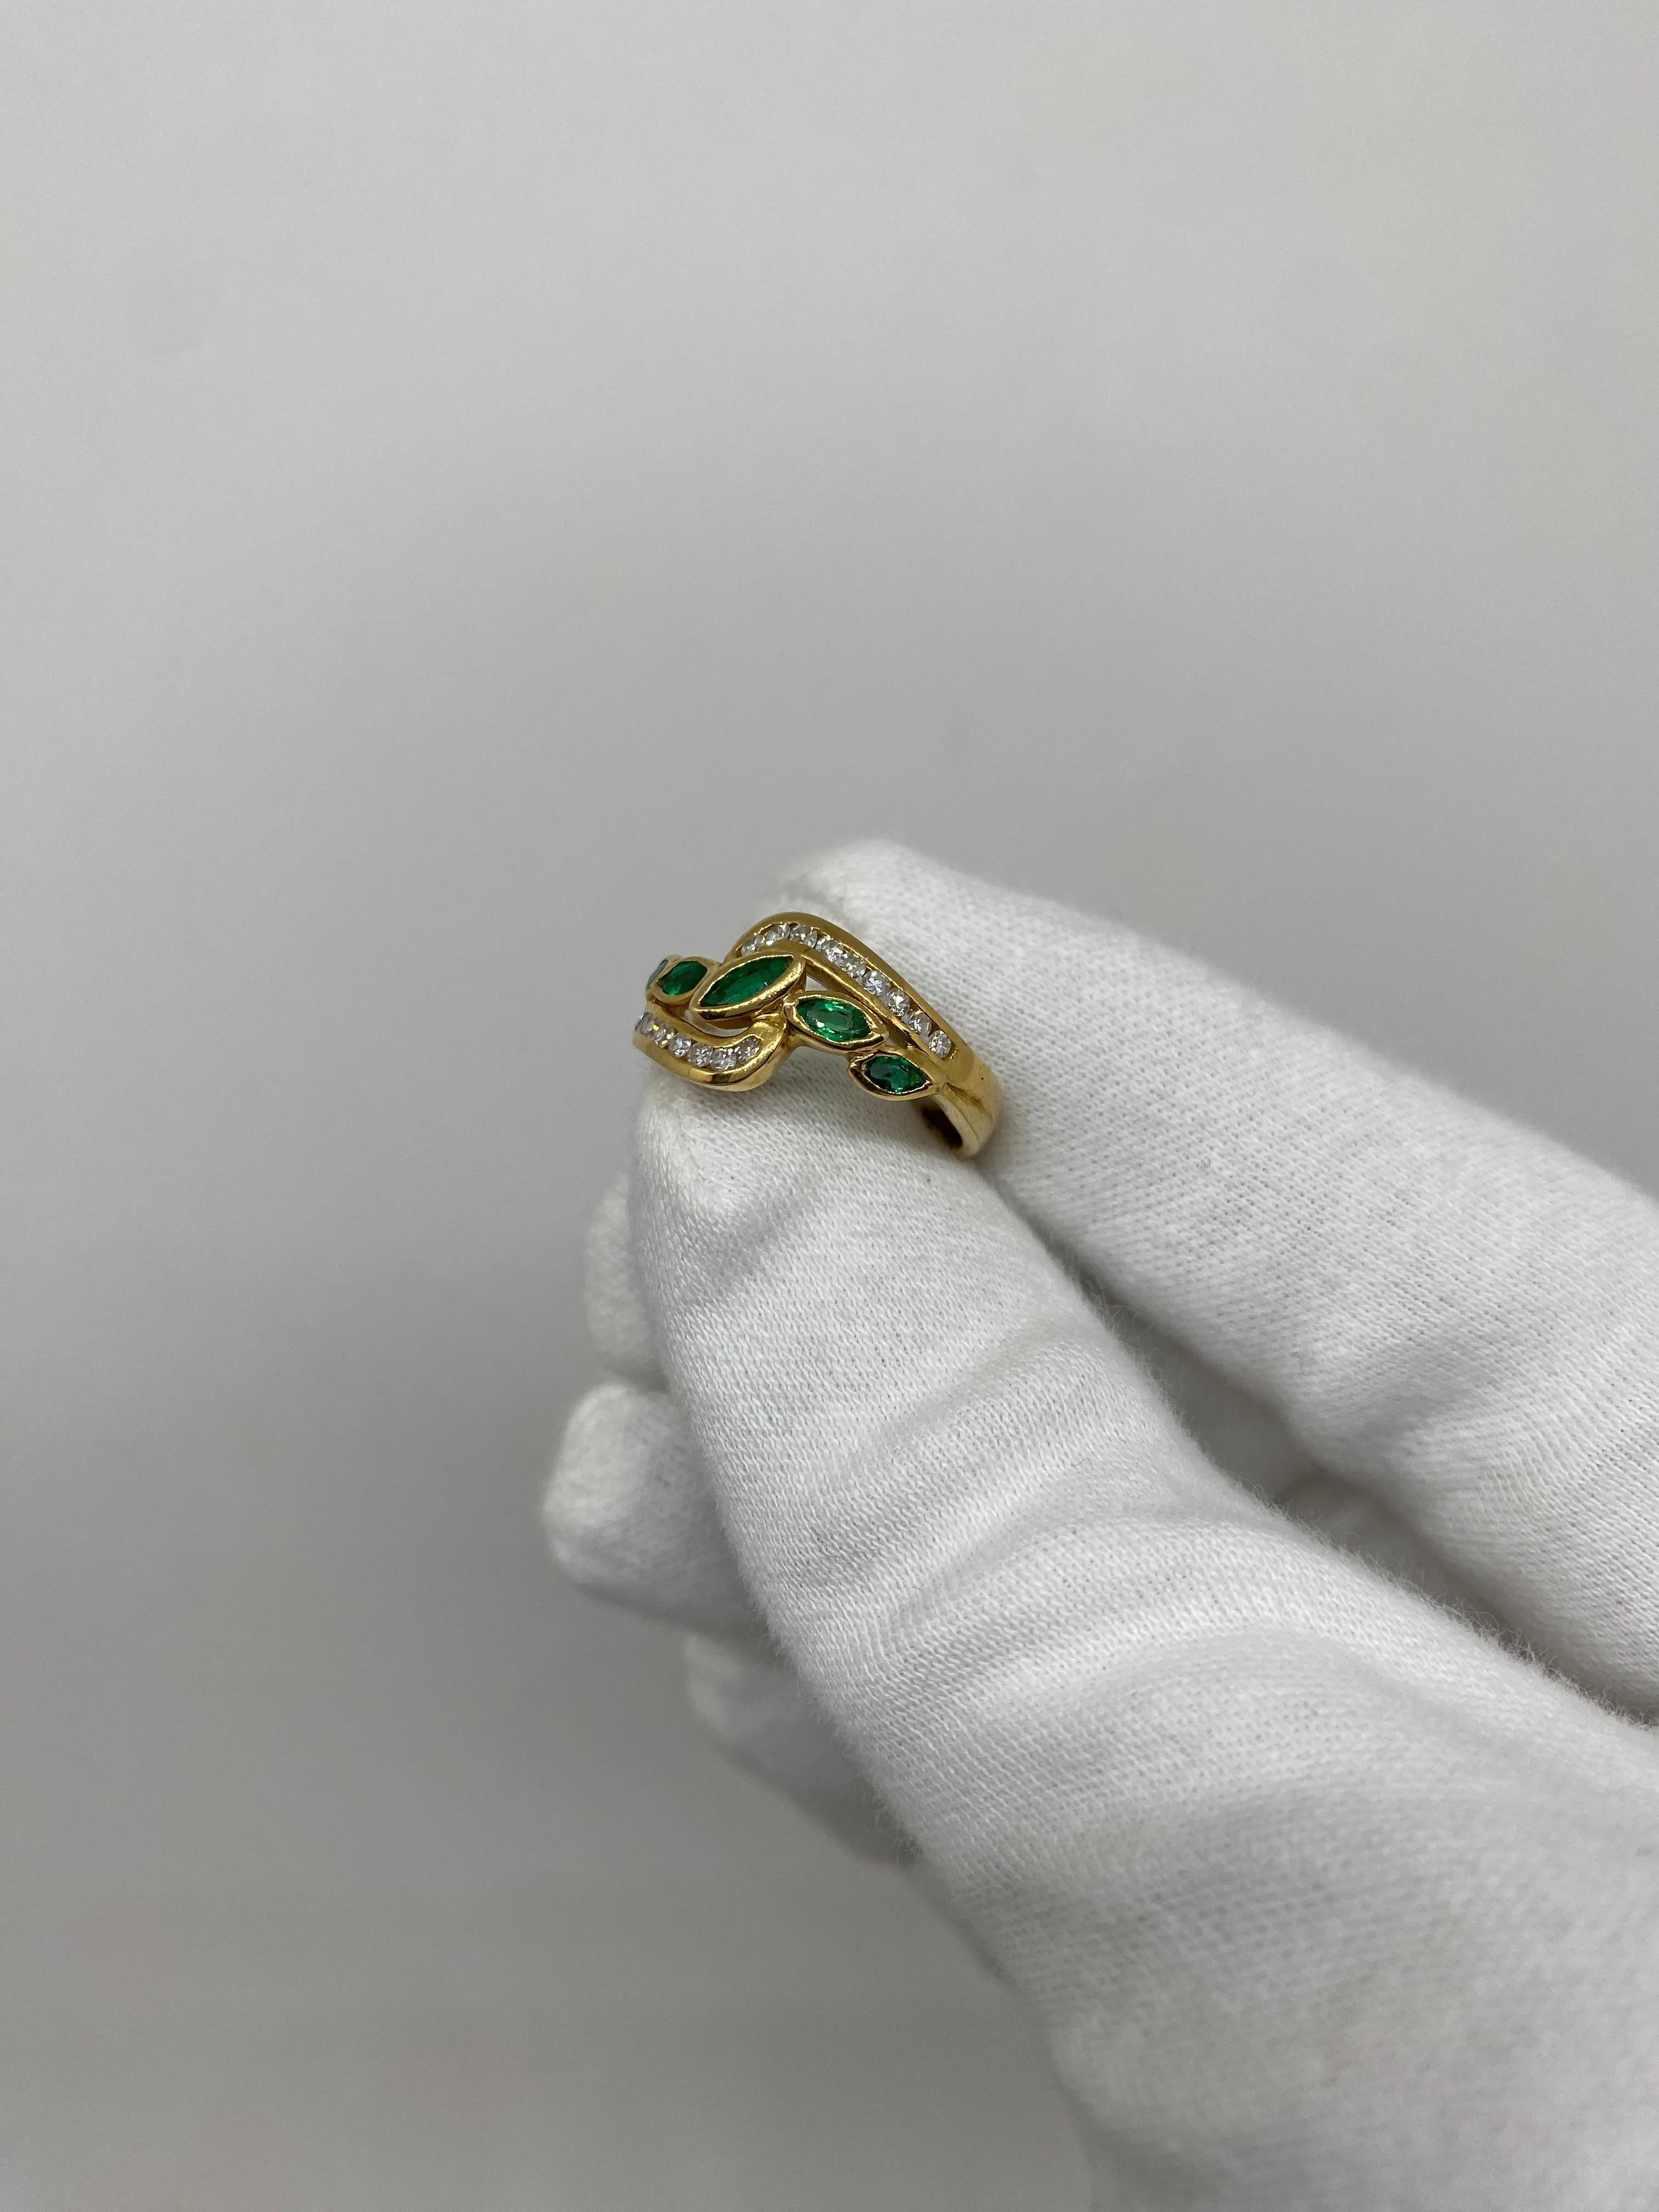 Ring made of 18kt yellow gold with navette-cut emeralds for ct .0.51 and natural white brilliant-cut diamonds for ct.0.30

Welcome to our jewelry collection, where every piece tells a story of timeless elegance and unparalleled craftsmanship. As a